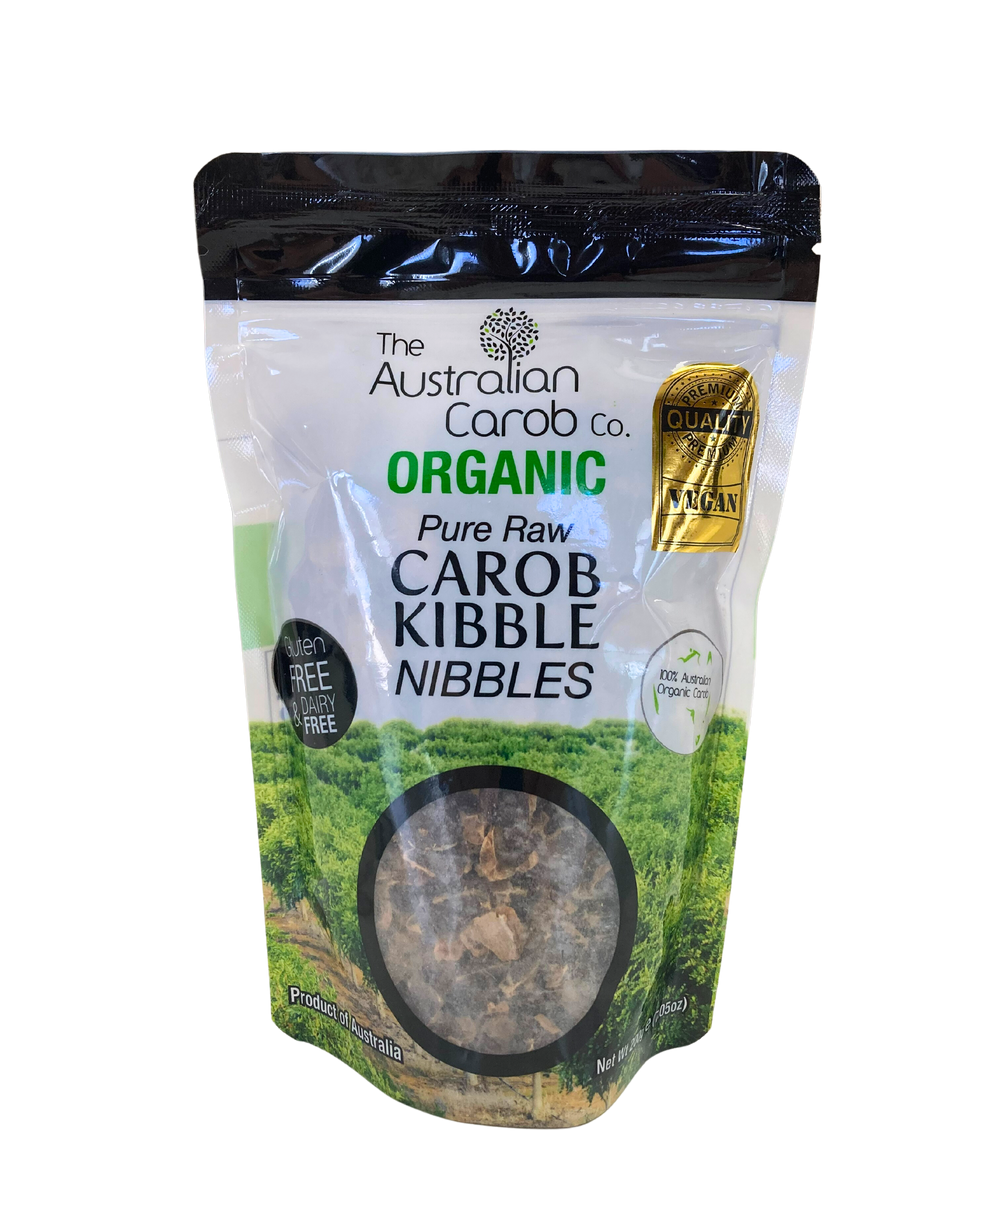 Organic Raw Carob Kibble Nibbles - Country Life Natural Foods